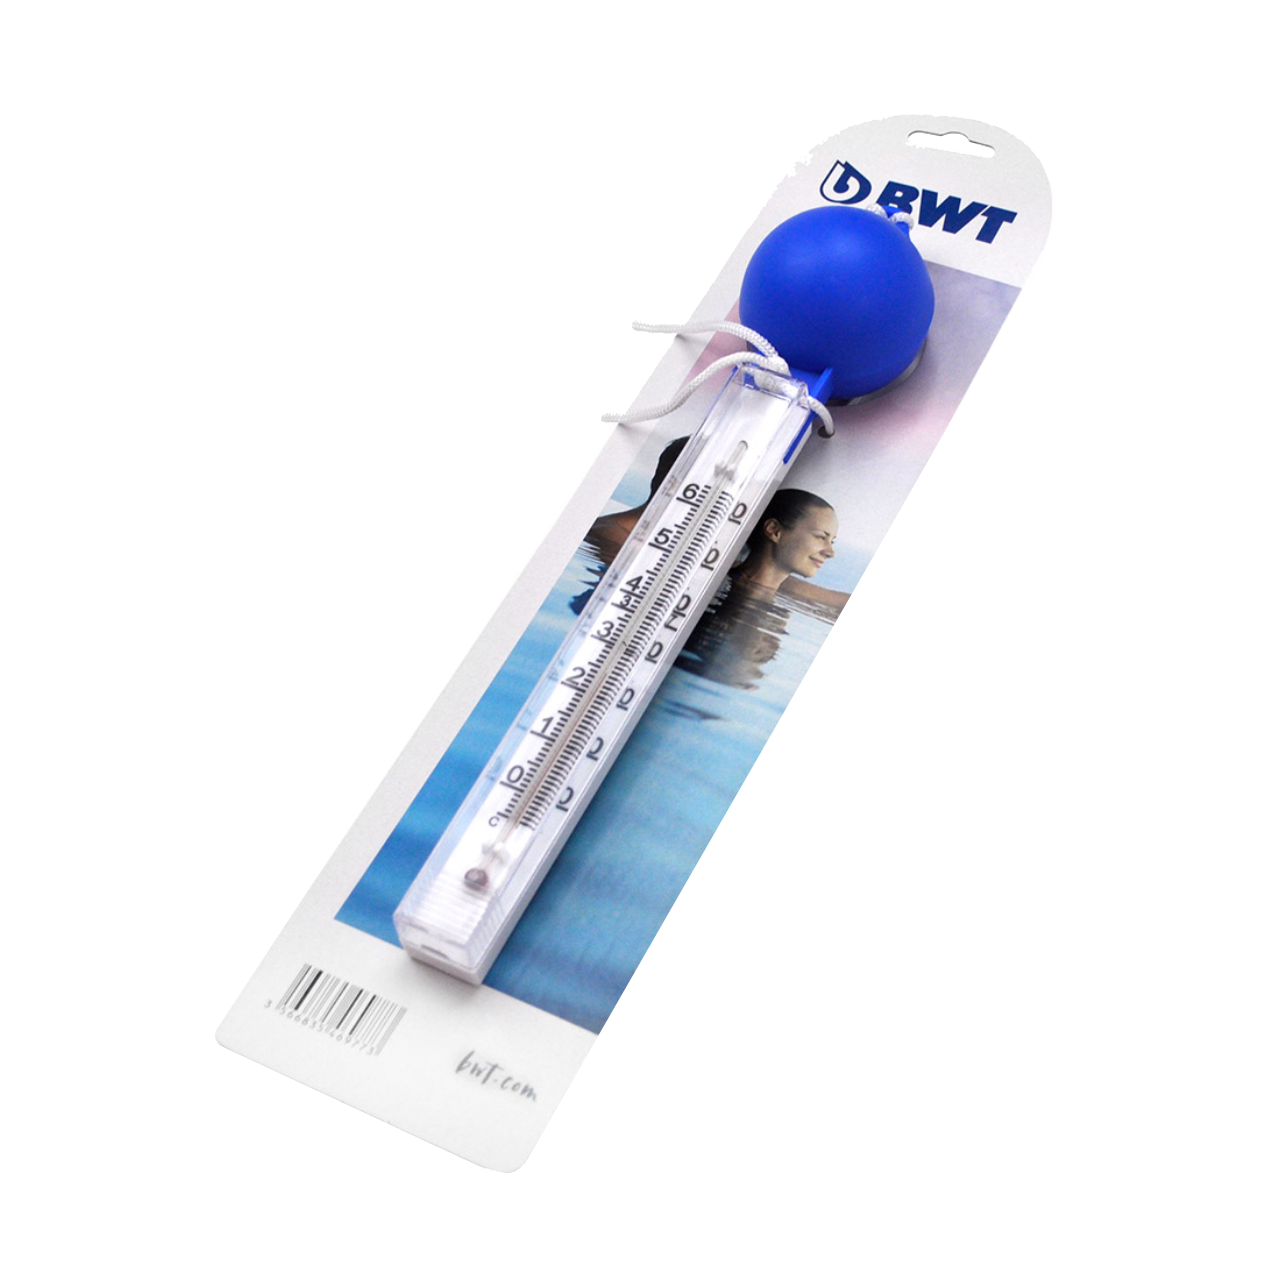 https://www.bwt.com/media/b2/70/53/1682494709/stabthermometer-pool.png